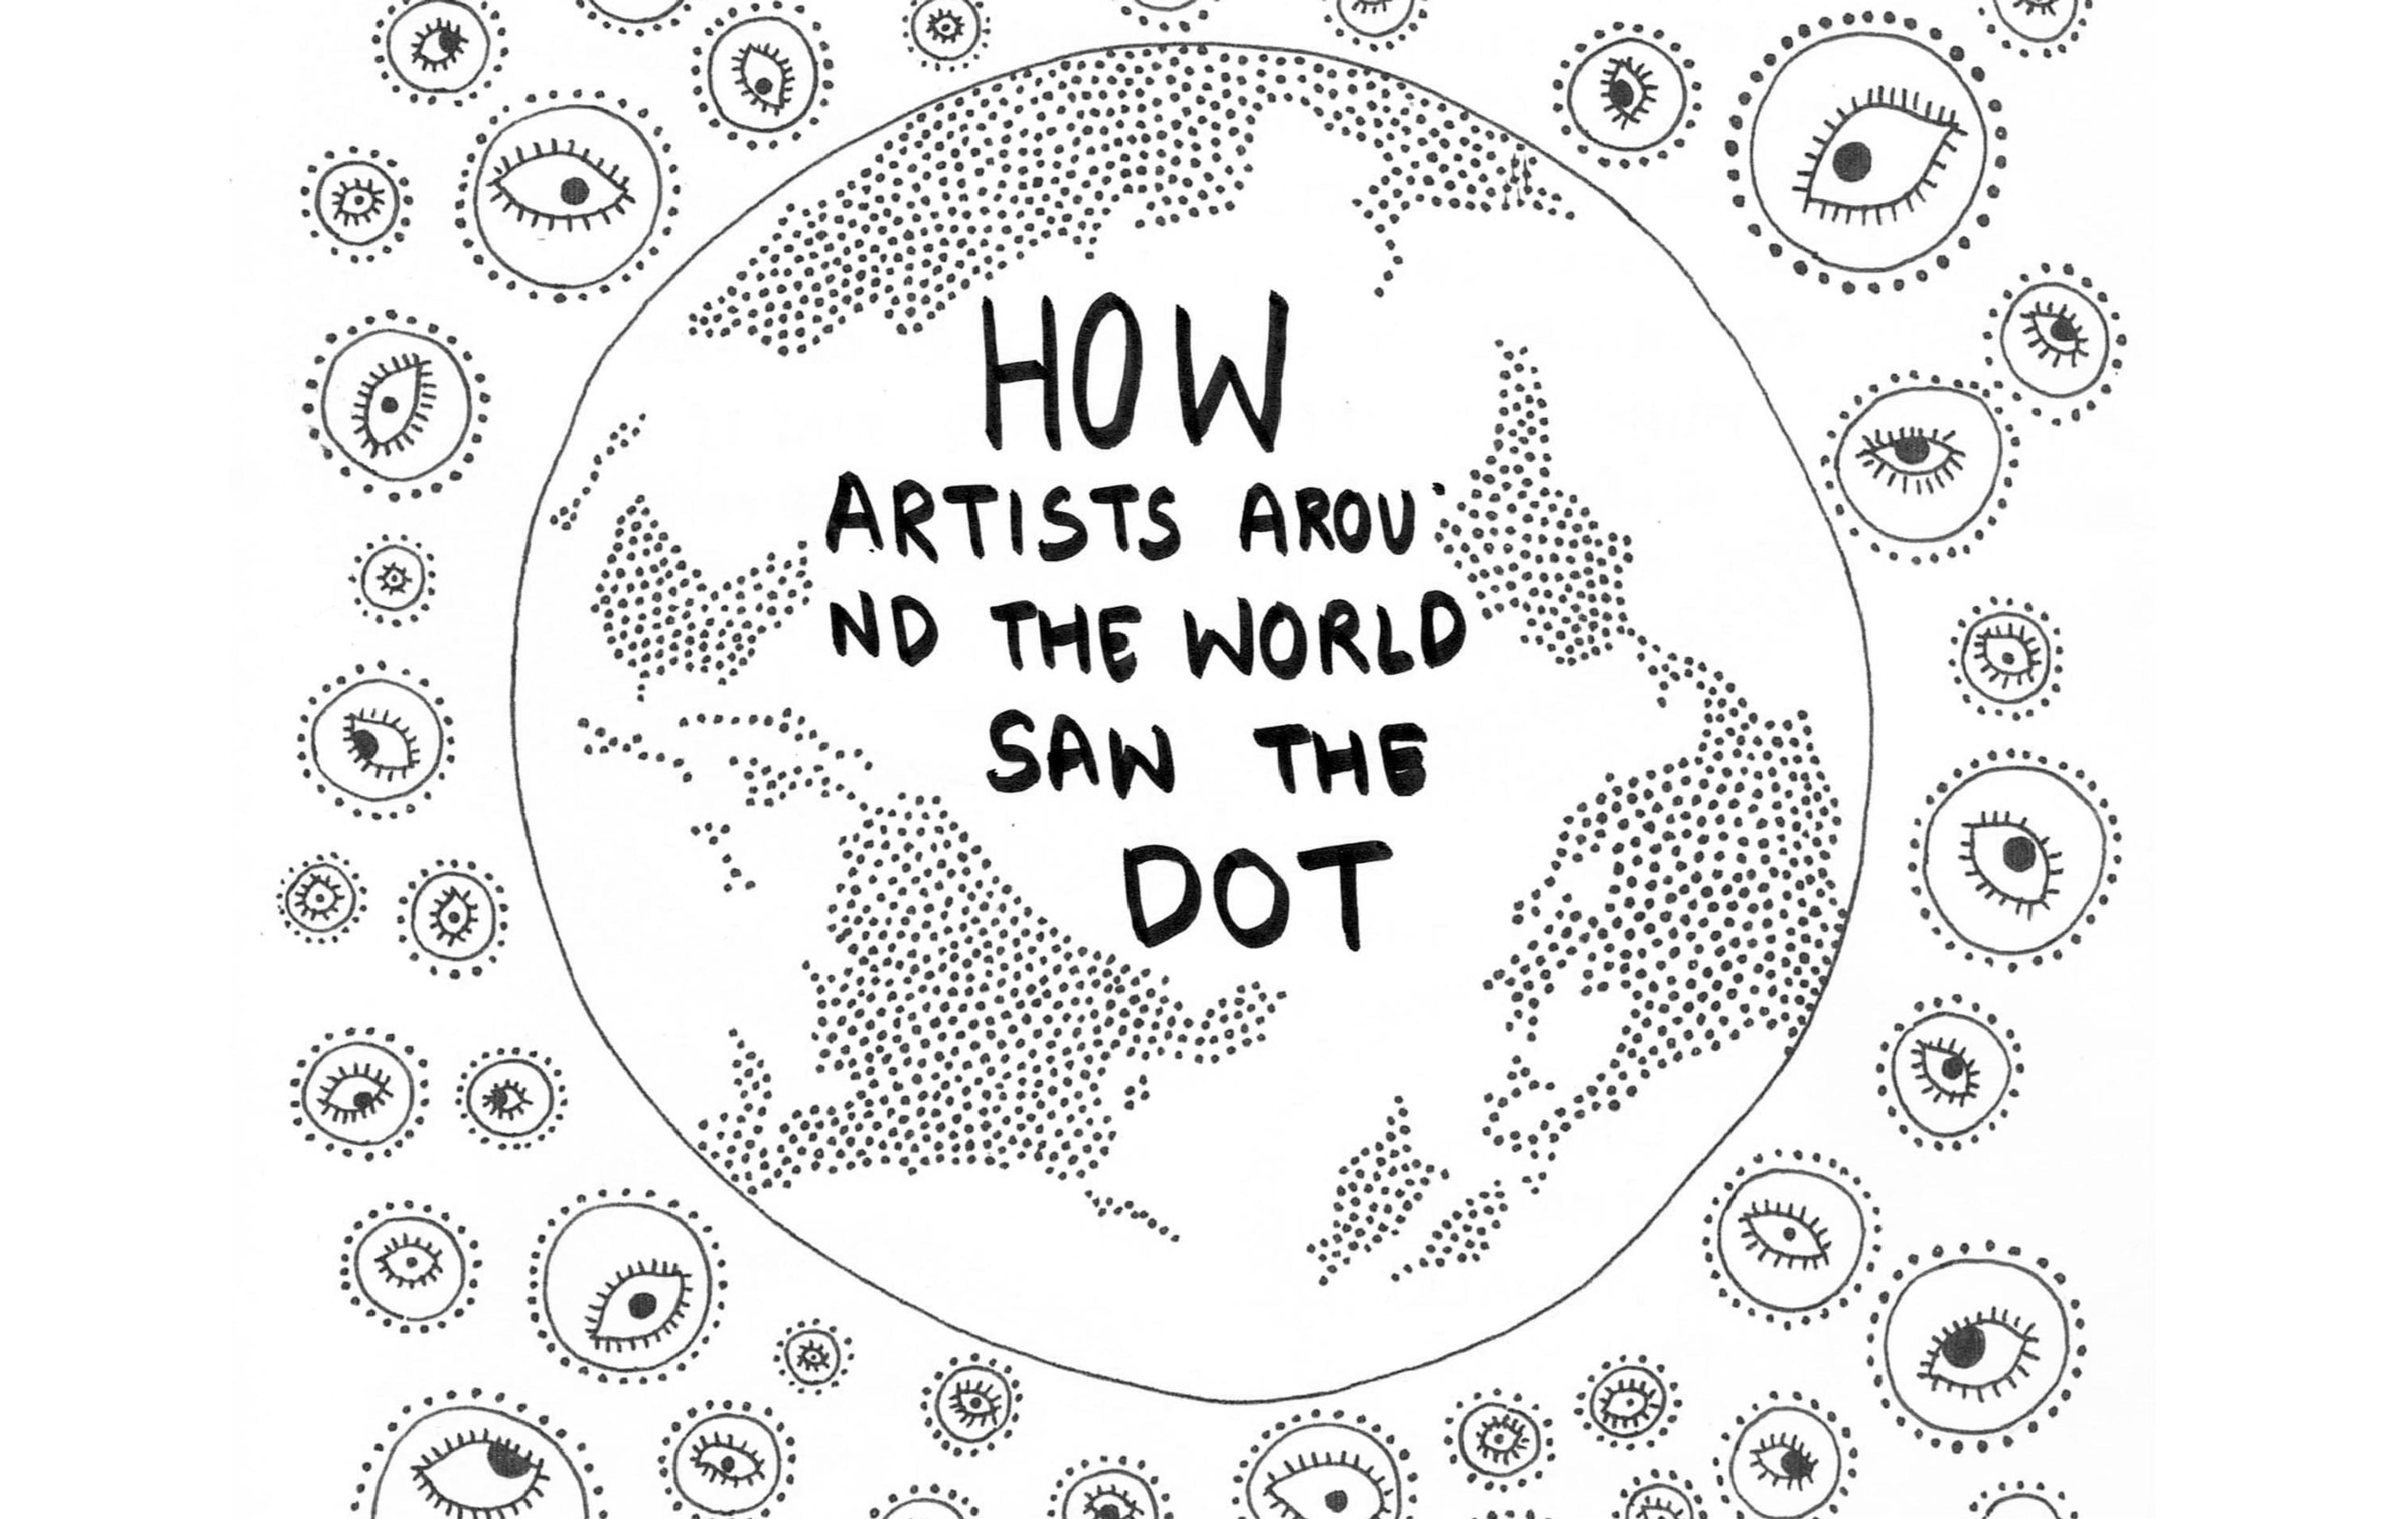 Line drawing of a globe with the words "How artists around the world saw the dot". The picture features drawings of eyes around the globe.